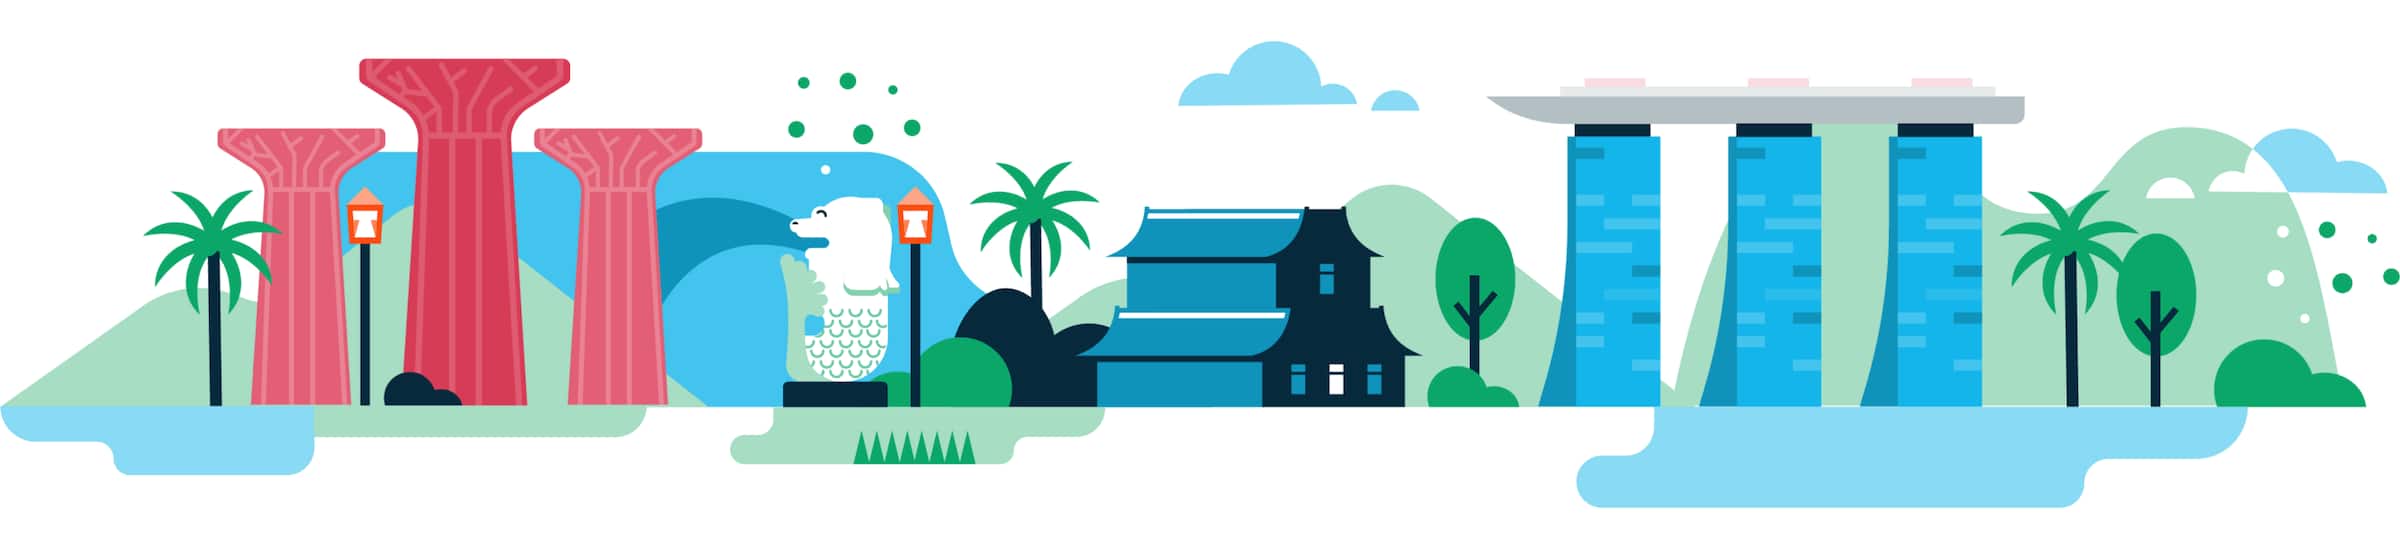 A header image for Xero’s Singapore offices shows some of the city’s best-known landmarks and attractions.